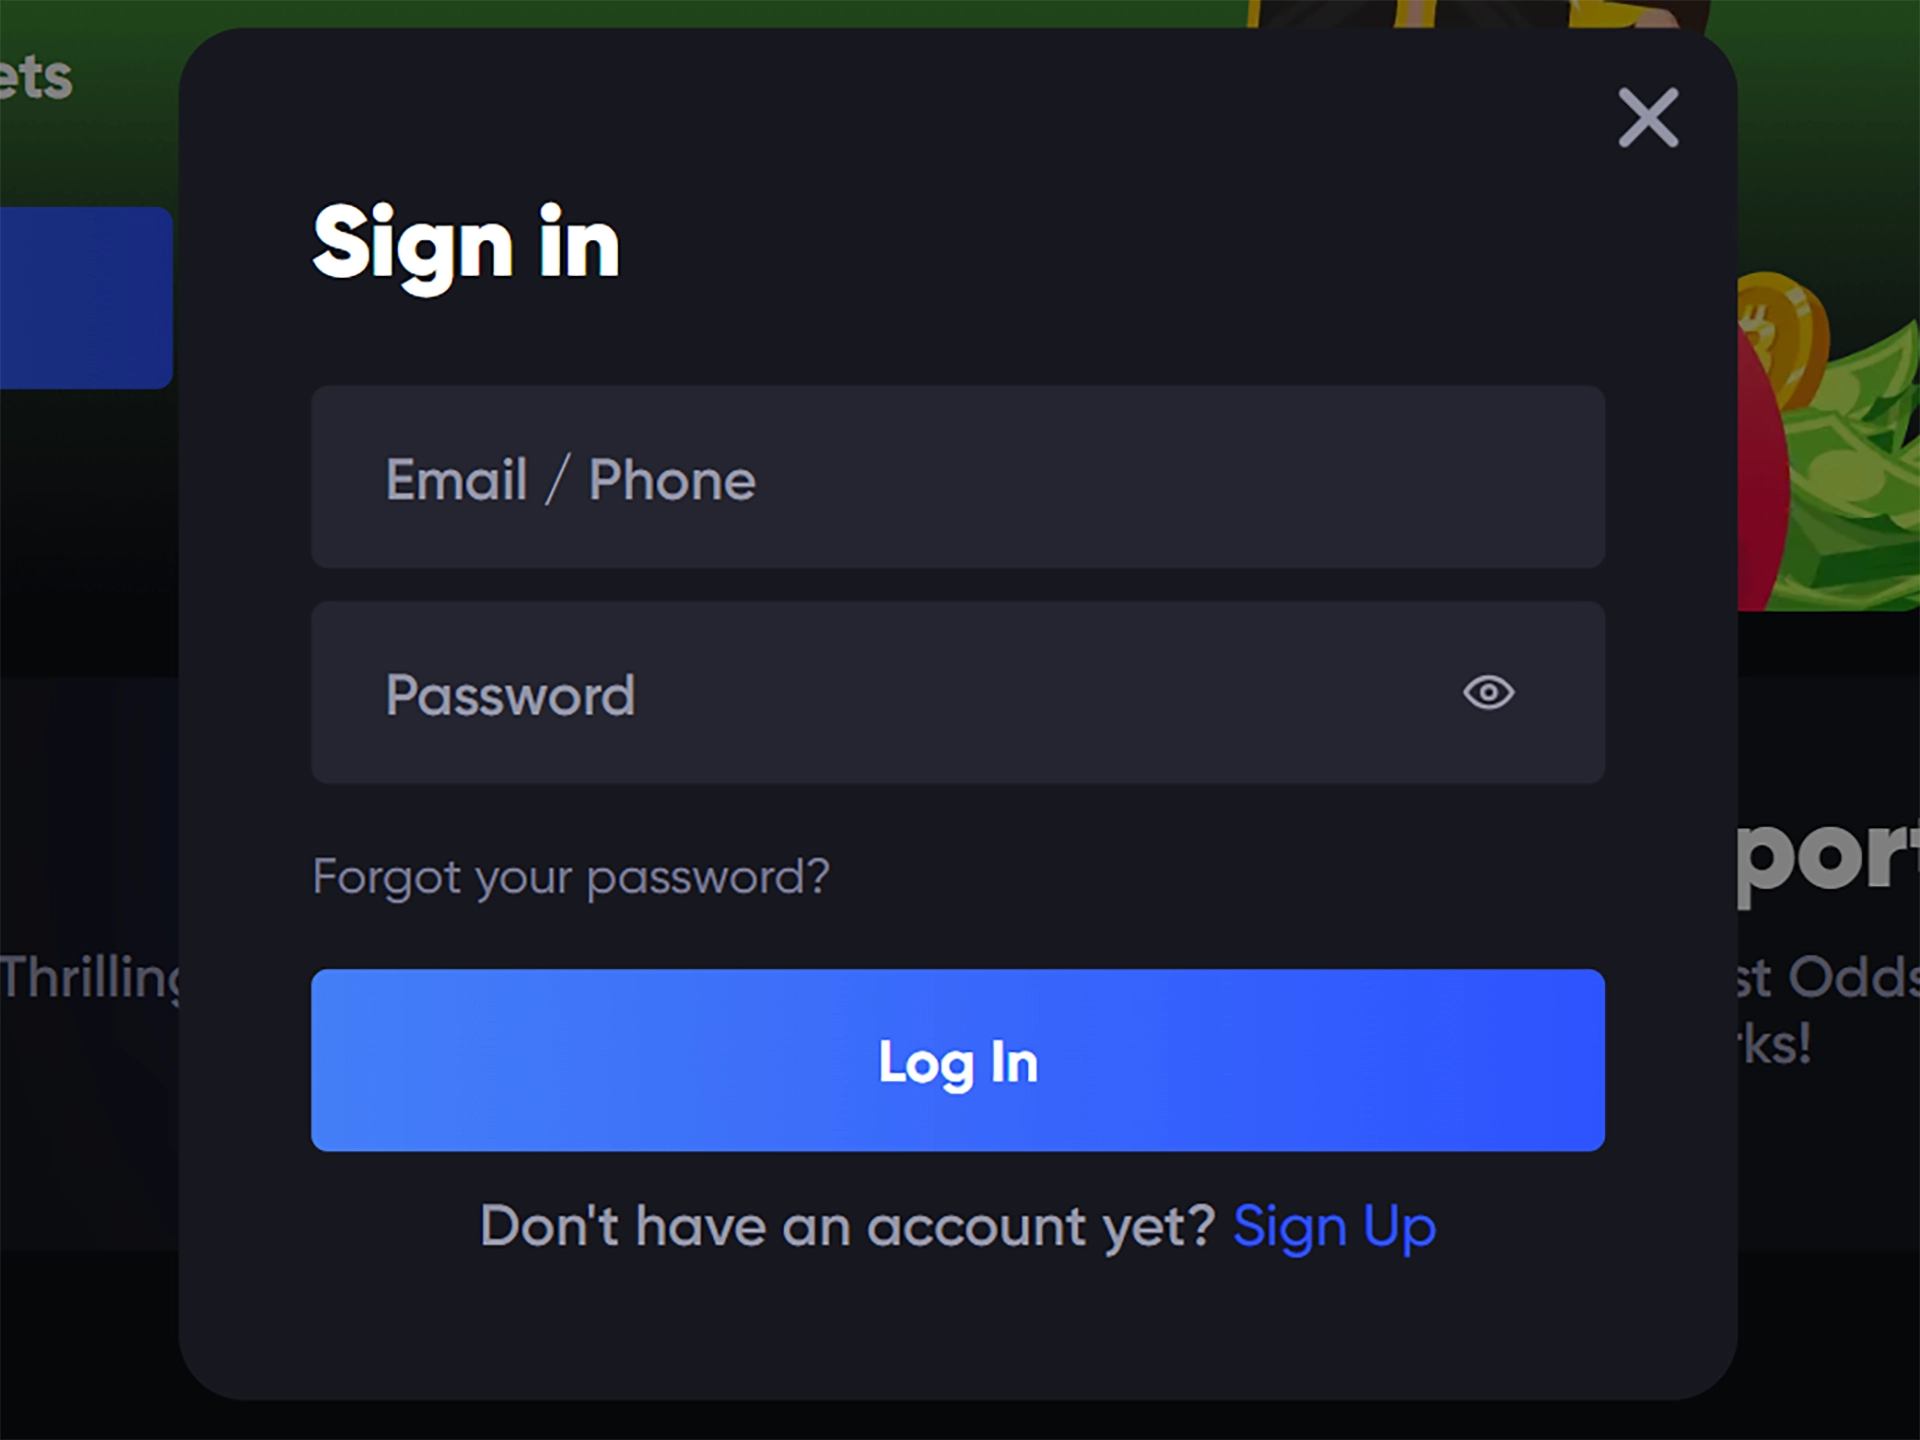 Enter your username and password to log in to your Richy Bet account.